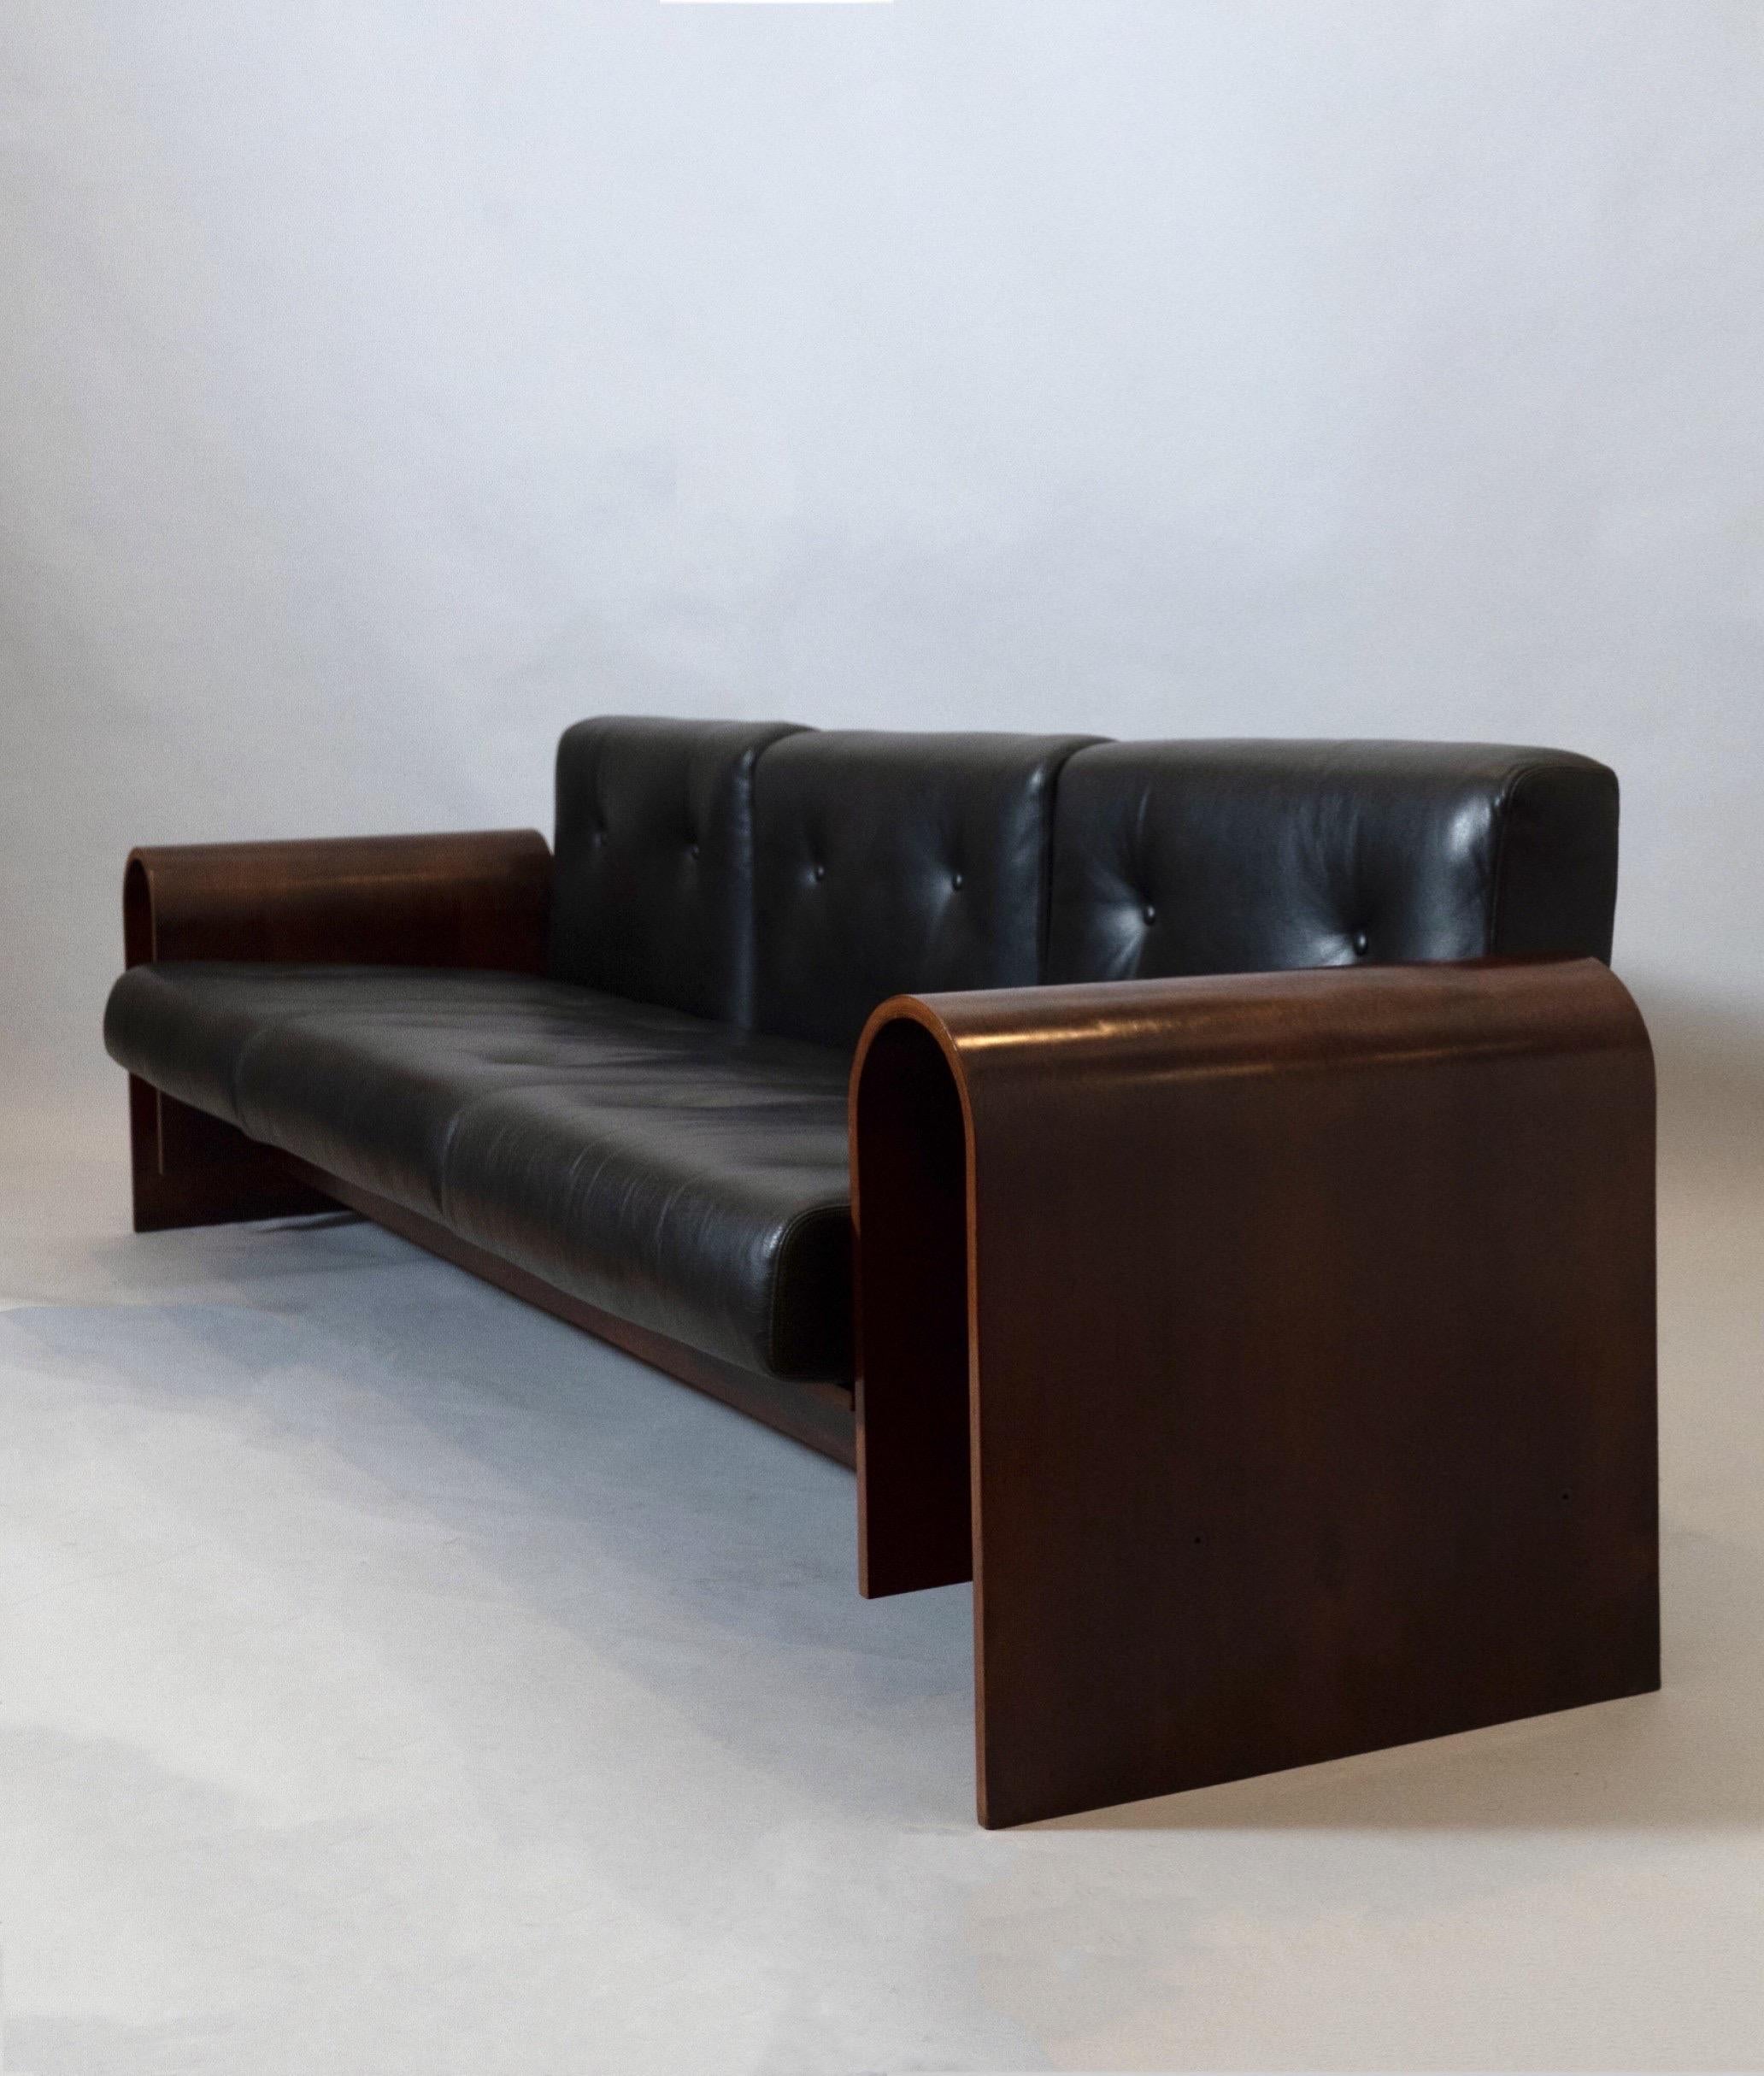 Oscar Niemeyer Exceptional Sofa in Rosewood and Leather, Hotel SESC, Brazil 1990 For Sale 2